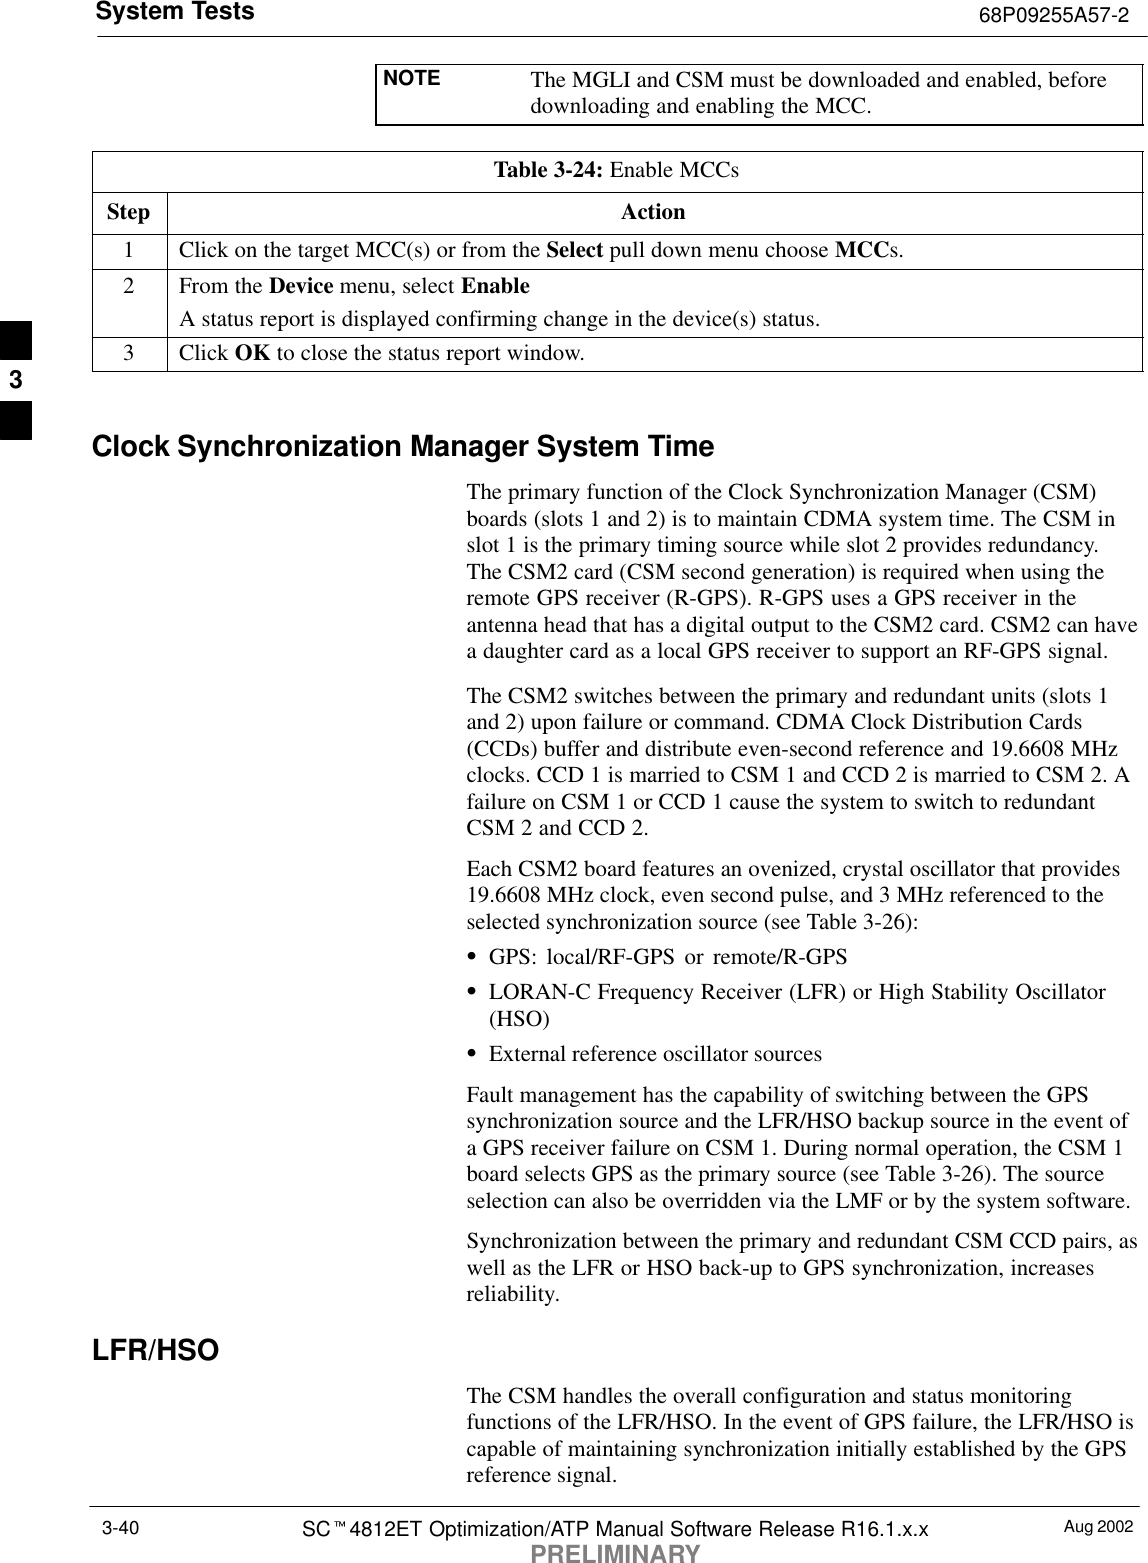 System Tests 68P09255A57-2Aug 2002SCt4812ET Optimization/ATP Manual Software Release R16.1.x.xPRELIMINARY3-40NOTE The MGLI and CSM must be downloaded and enabled, beforedownloading and enabling the MCC.Table 3-24: Enable MCCsStep Action1Click on the target MCC(s) or from the Select pull down menu choose MCCs.2From the Device menu, select EnableA status report is displayed confirming change in the device(s) status.3 Click OK to close the status report window. Clock Synchronization Manager System TimeThe primary function of the Clock Synchronization Manager (CSM)boards (slots 1 and 2) is to maintain CDMA system time. The CSM inslot 1 is the primary timing source while slot 2 provides redundancy.The CSM2 card (CSM second generation) is required when using theremote GPS receiver (R-GPS). R-GPS uses a GPS receiver in theantenna head that has a digital output to the CSM2 card. CSM2 can havea daughter card as a local GPS receiver to support an RF-GPS signal.The CSM2 switches between the primary and redundant units (slots 1and 2) upon failure or command. CDMA Clock Distribution Cards(CCDs) buffer and distribute even-second reference and 19.6608 MHzclocks. CCD 1 is married to CSM 1 and CCD 2 is married to CSM 2. Afailure on CSM 1 or CCD 1 cause the system to switch to redundantCSM 2 and CCD 2.Each CSM2 board features an ovenized, crystal oscillator that provides19.6608 MHz clock, even second pulse, and 3 MHz referenced to theselected synchronization source (see Table 3-26):SGPS: local/RF-GPS or remote/R-GPSSLORAN-C Frequency Receiver (LFR) or High Stability Oscillator(HSO)SExternal reference oscillator sourcesFault management has the capability of switching between the GPSsynchronization source and the LFR/HSO backup source in the event ofa GPS receiver failure on CSM 1. During normal operation, the CSM 1board selects GPS as the primary source (see Table 3-26). The sourceselection can also be overridden via the LMF or by the system software.Synchronization between the primary and redundant CSM CCD pairs, aswell as the LFR or HSO back-up to GPS synchronization, increasesreliability.LFR/HSOThe CSM handles the overall configuration and status monitoringfunctions of the LFR/HSO. In the event of GPS failure, the LFR/HSO iscapable of maintaining synchronization initially established by the GPSreference signal.3